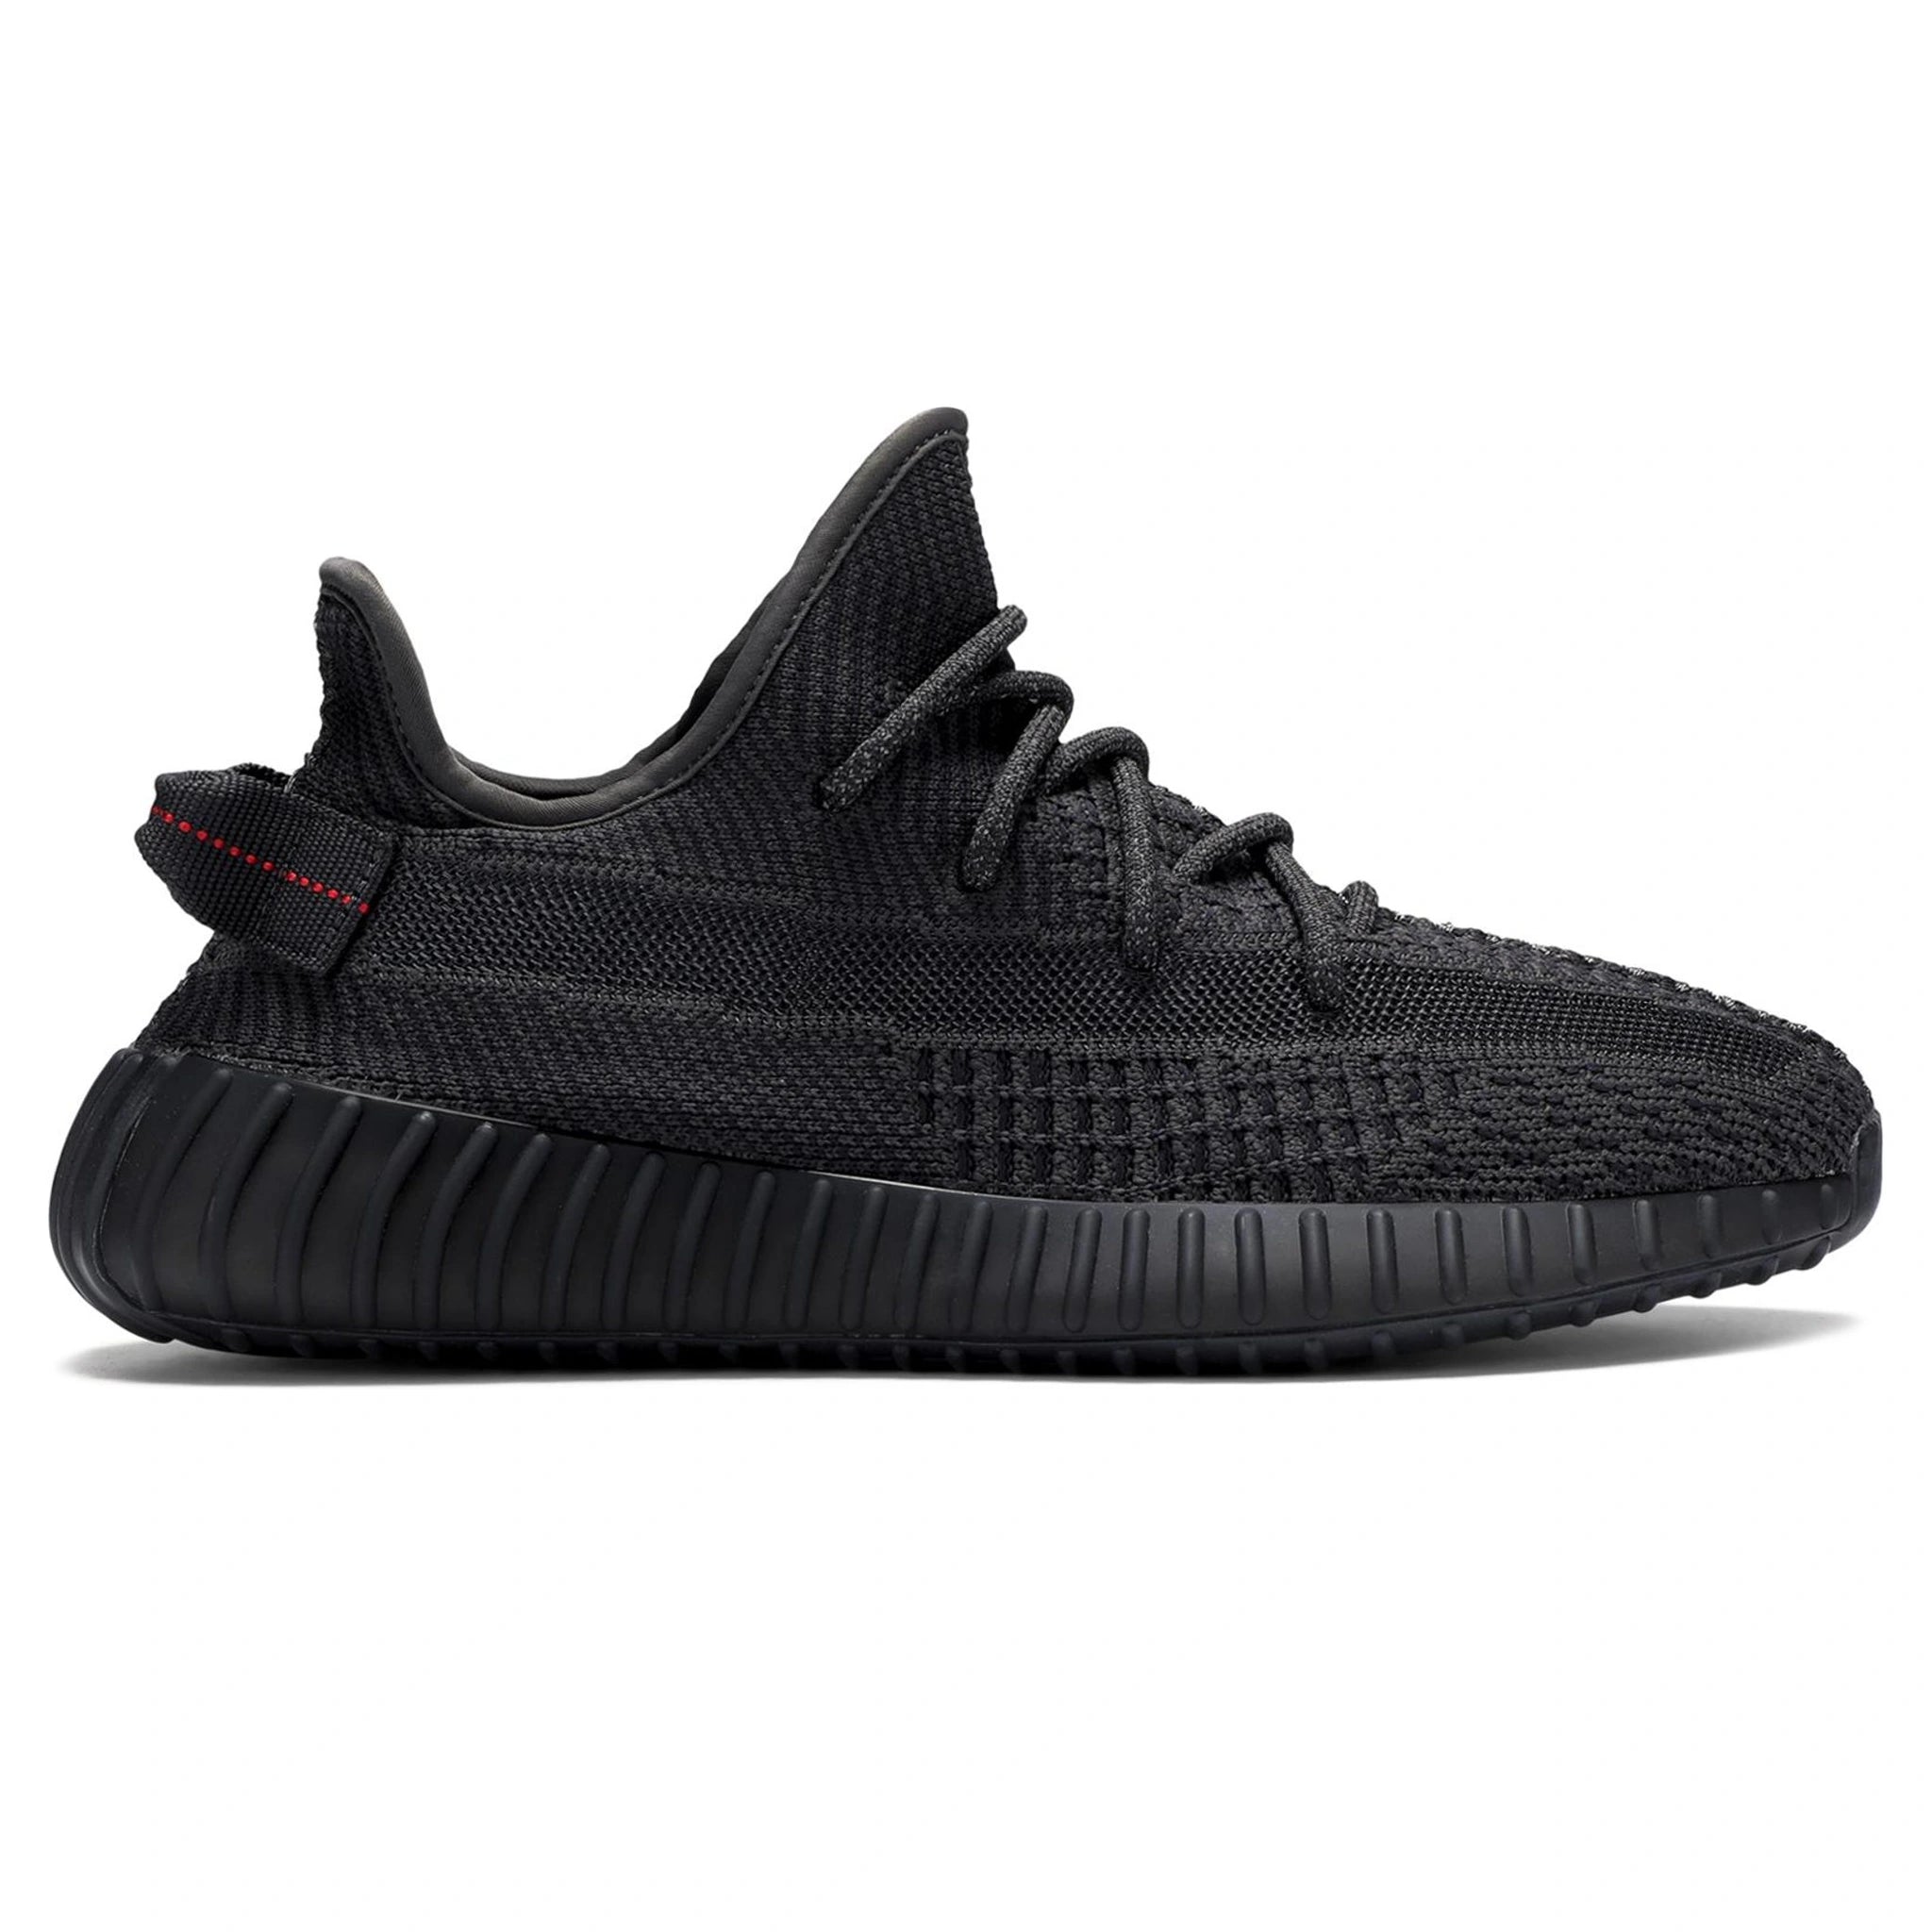 Side view of Adidas Yeezy Boost 350 V2 Static Black Non Reflective FU9006